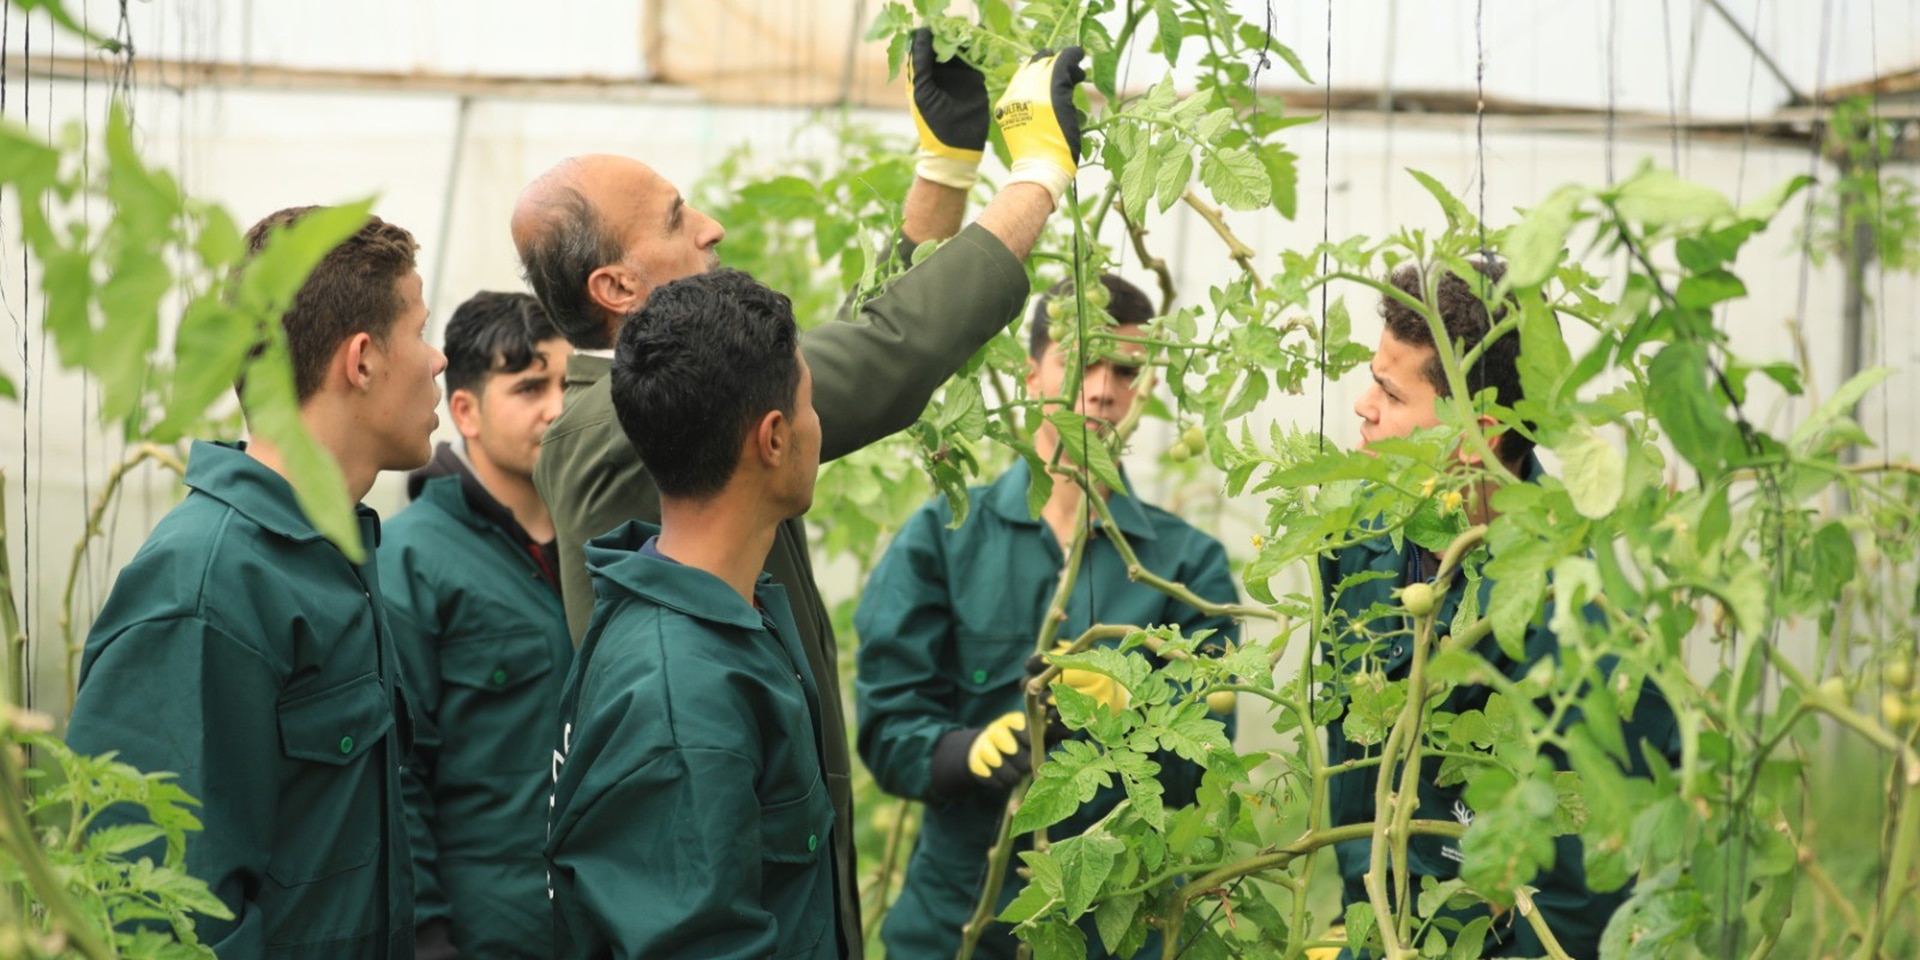 At an agricultural school, a teacher explains a plant to young men. 